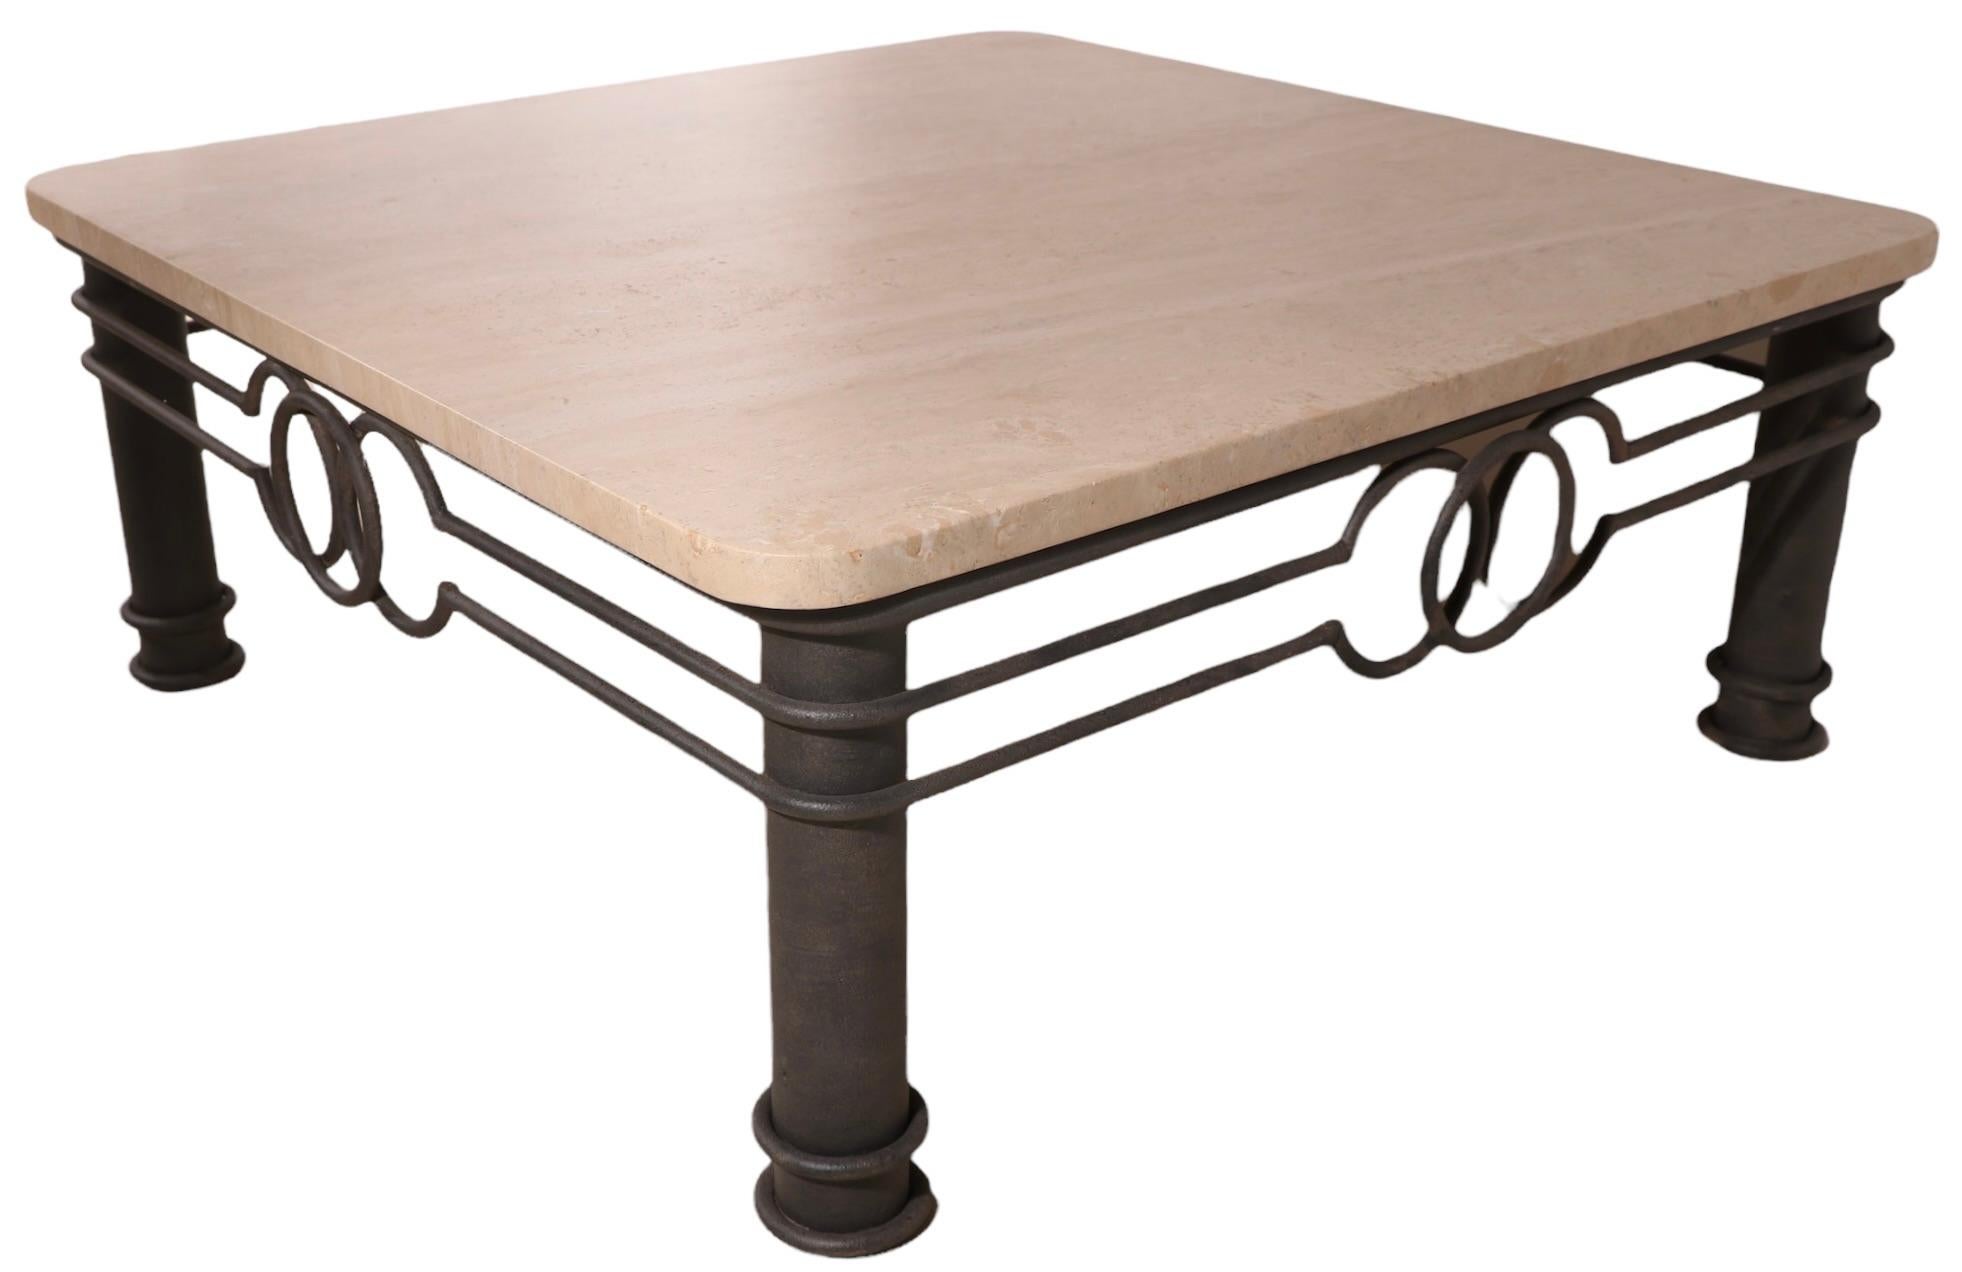 Late 20th Century Post Modern Coffee Table with Thick Marble Top on Wrought Iron Base Ca. 1980's For Sale